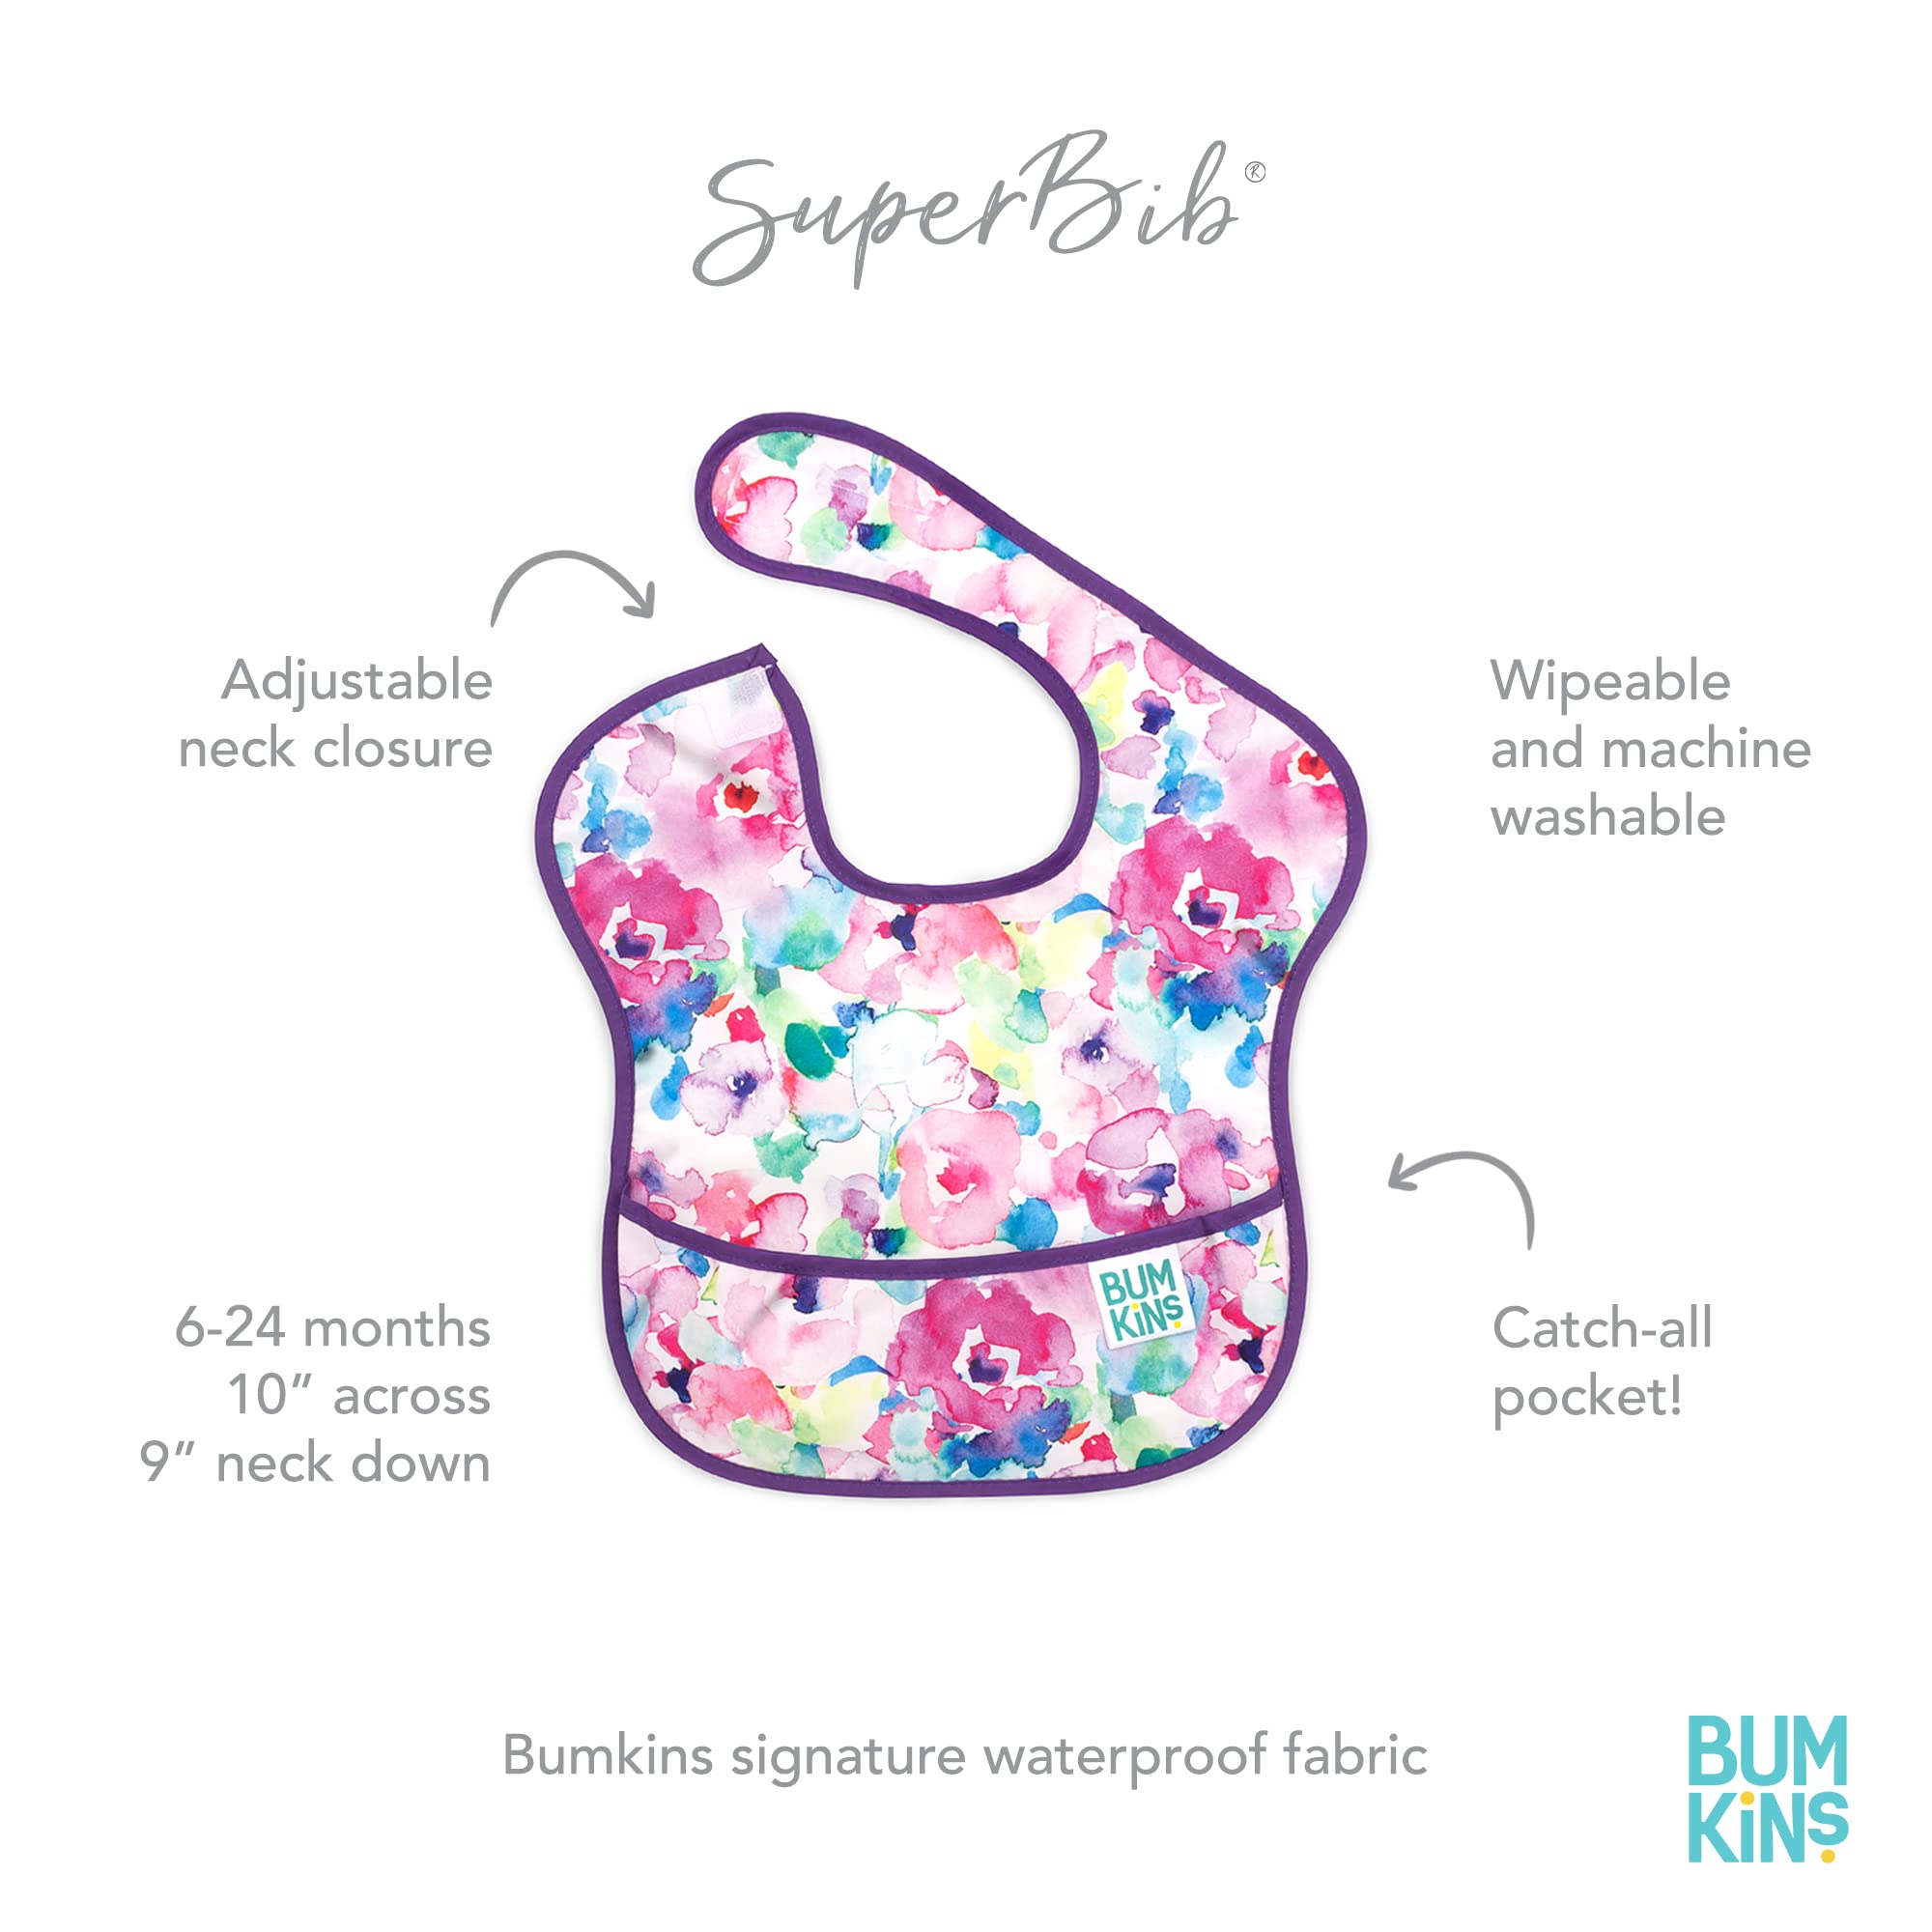 Bumkins Bibs, Baby Bibs for Girl or Boy, SuperBib Baby and Toddler Bib for 6-24 Months